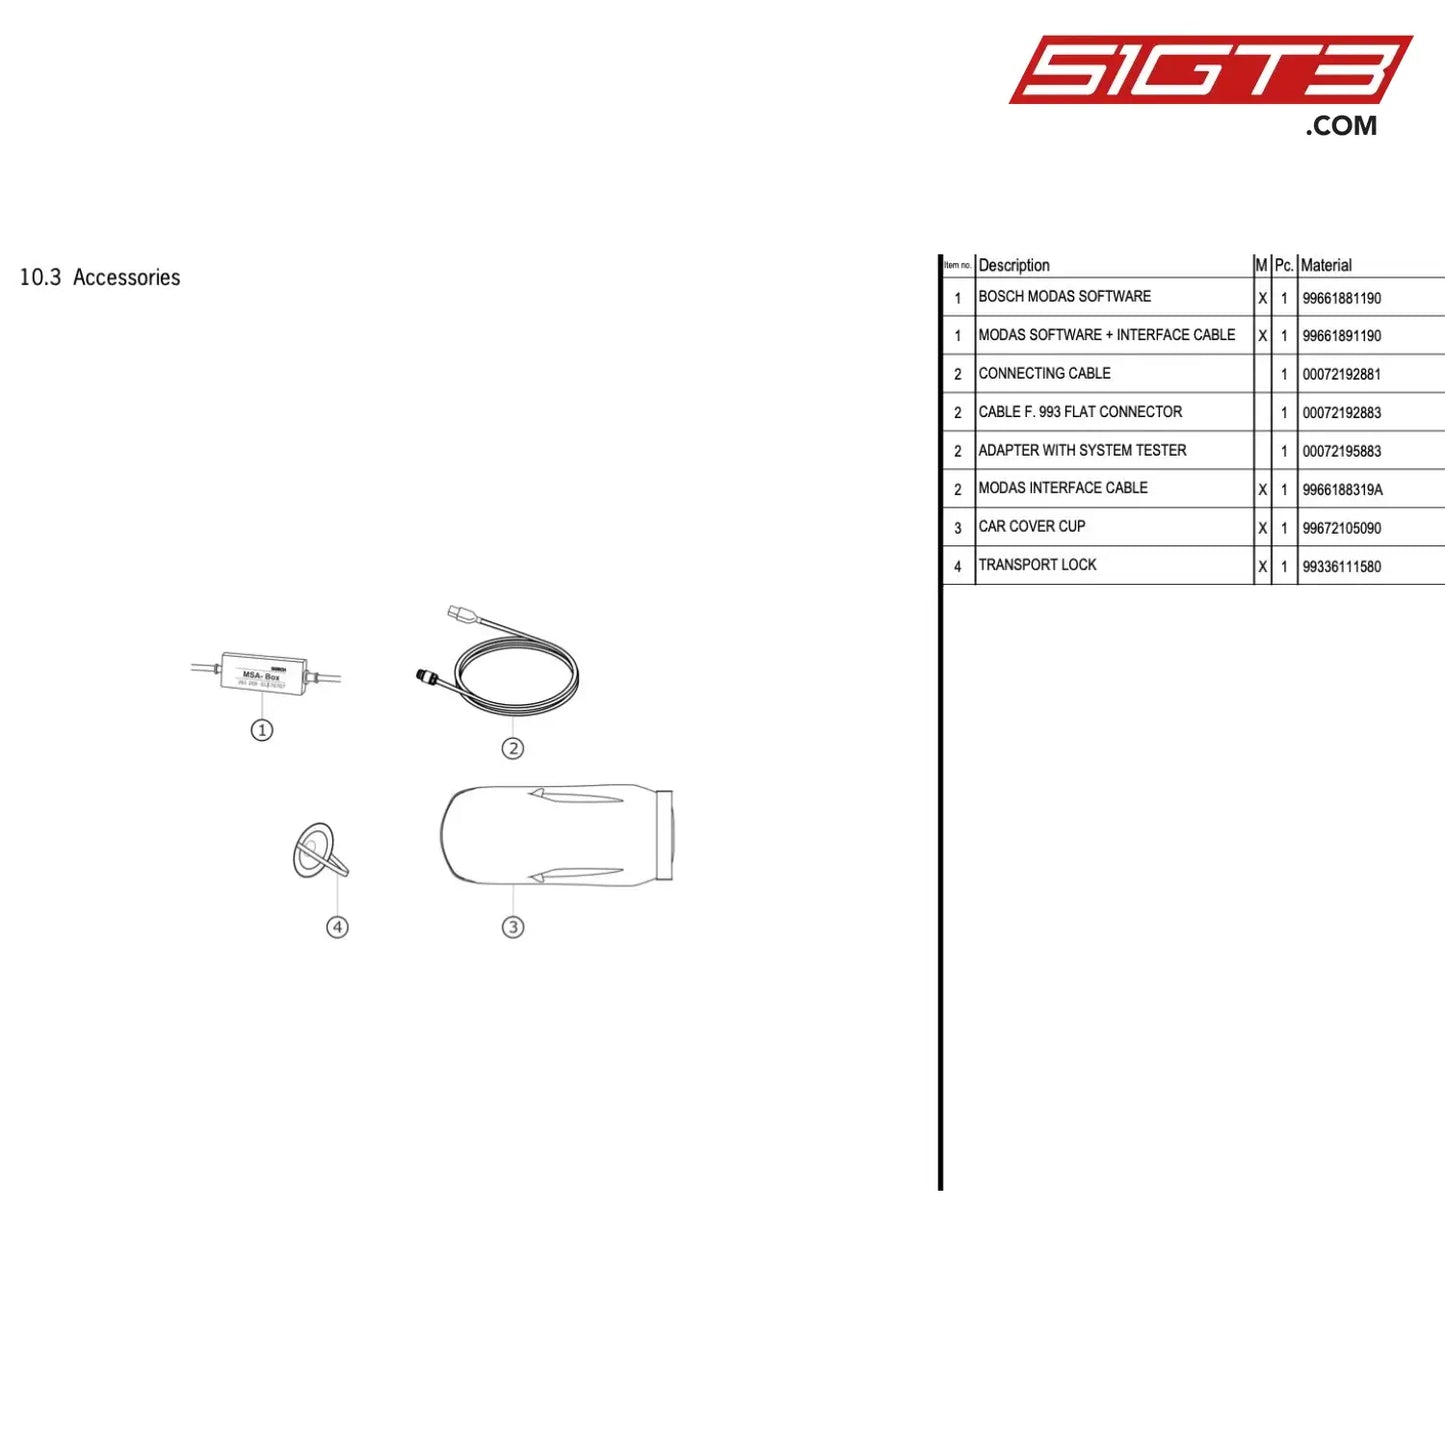 Connecting Cable - 72192881 [Porsche 911 Gt3 Cup Type 996] Accessories